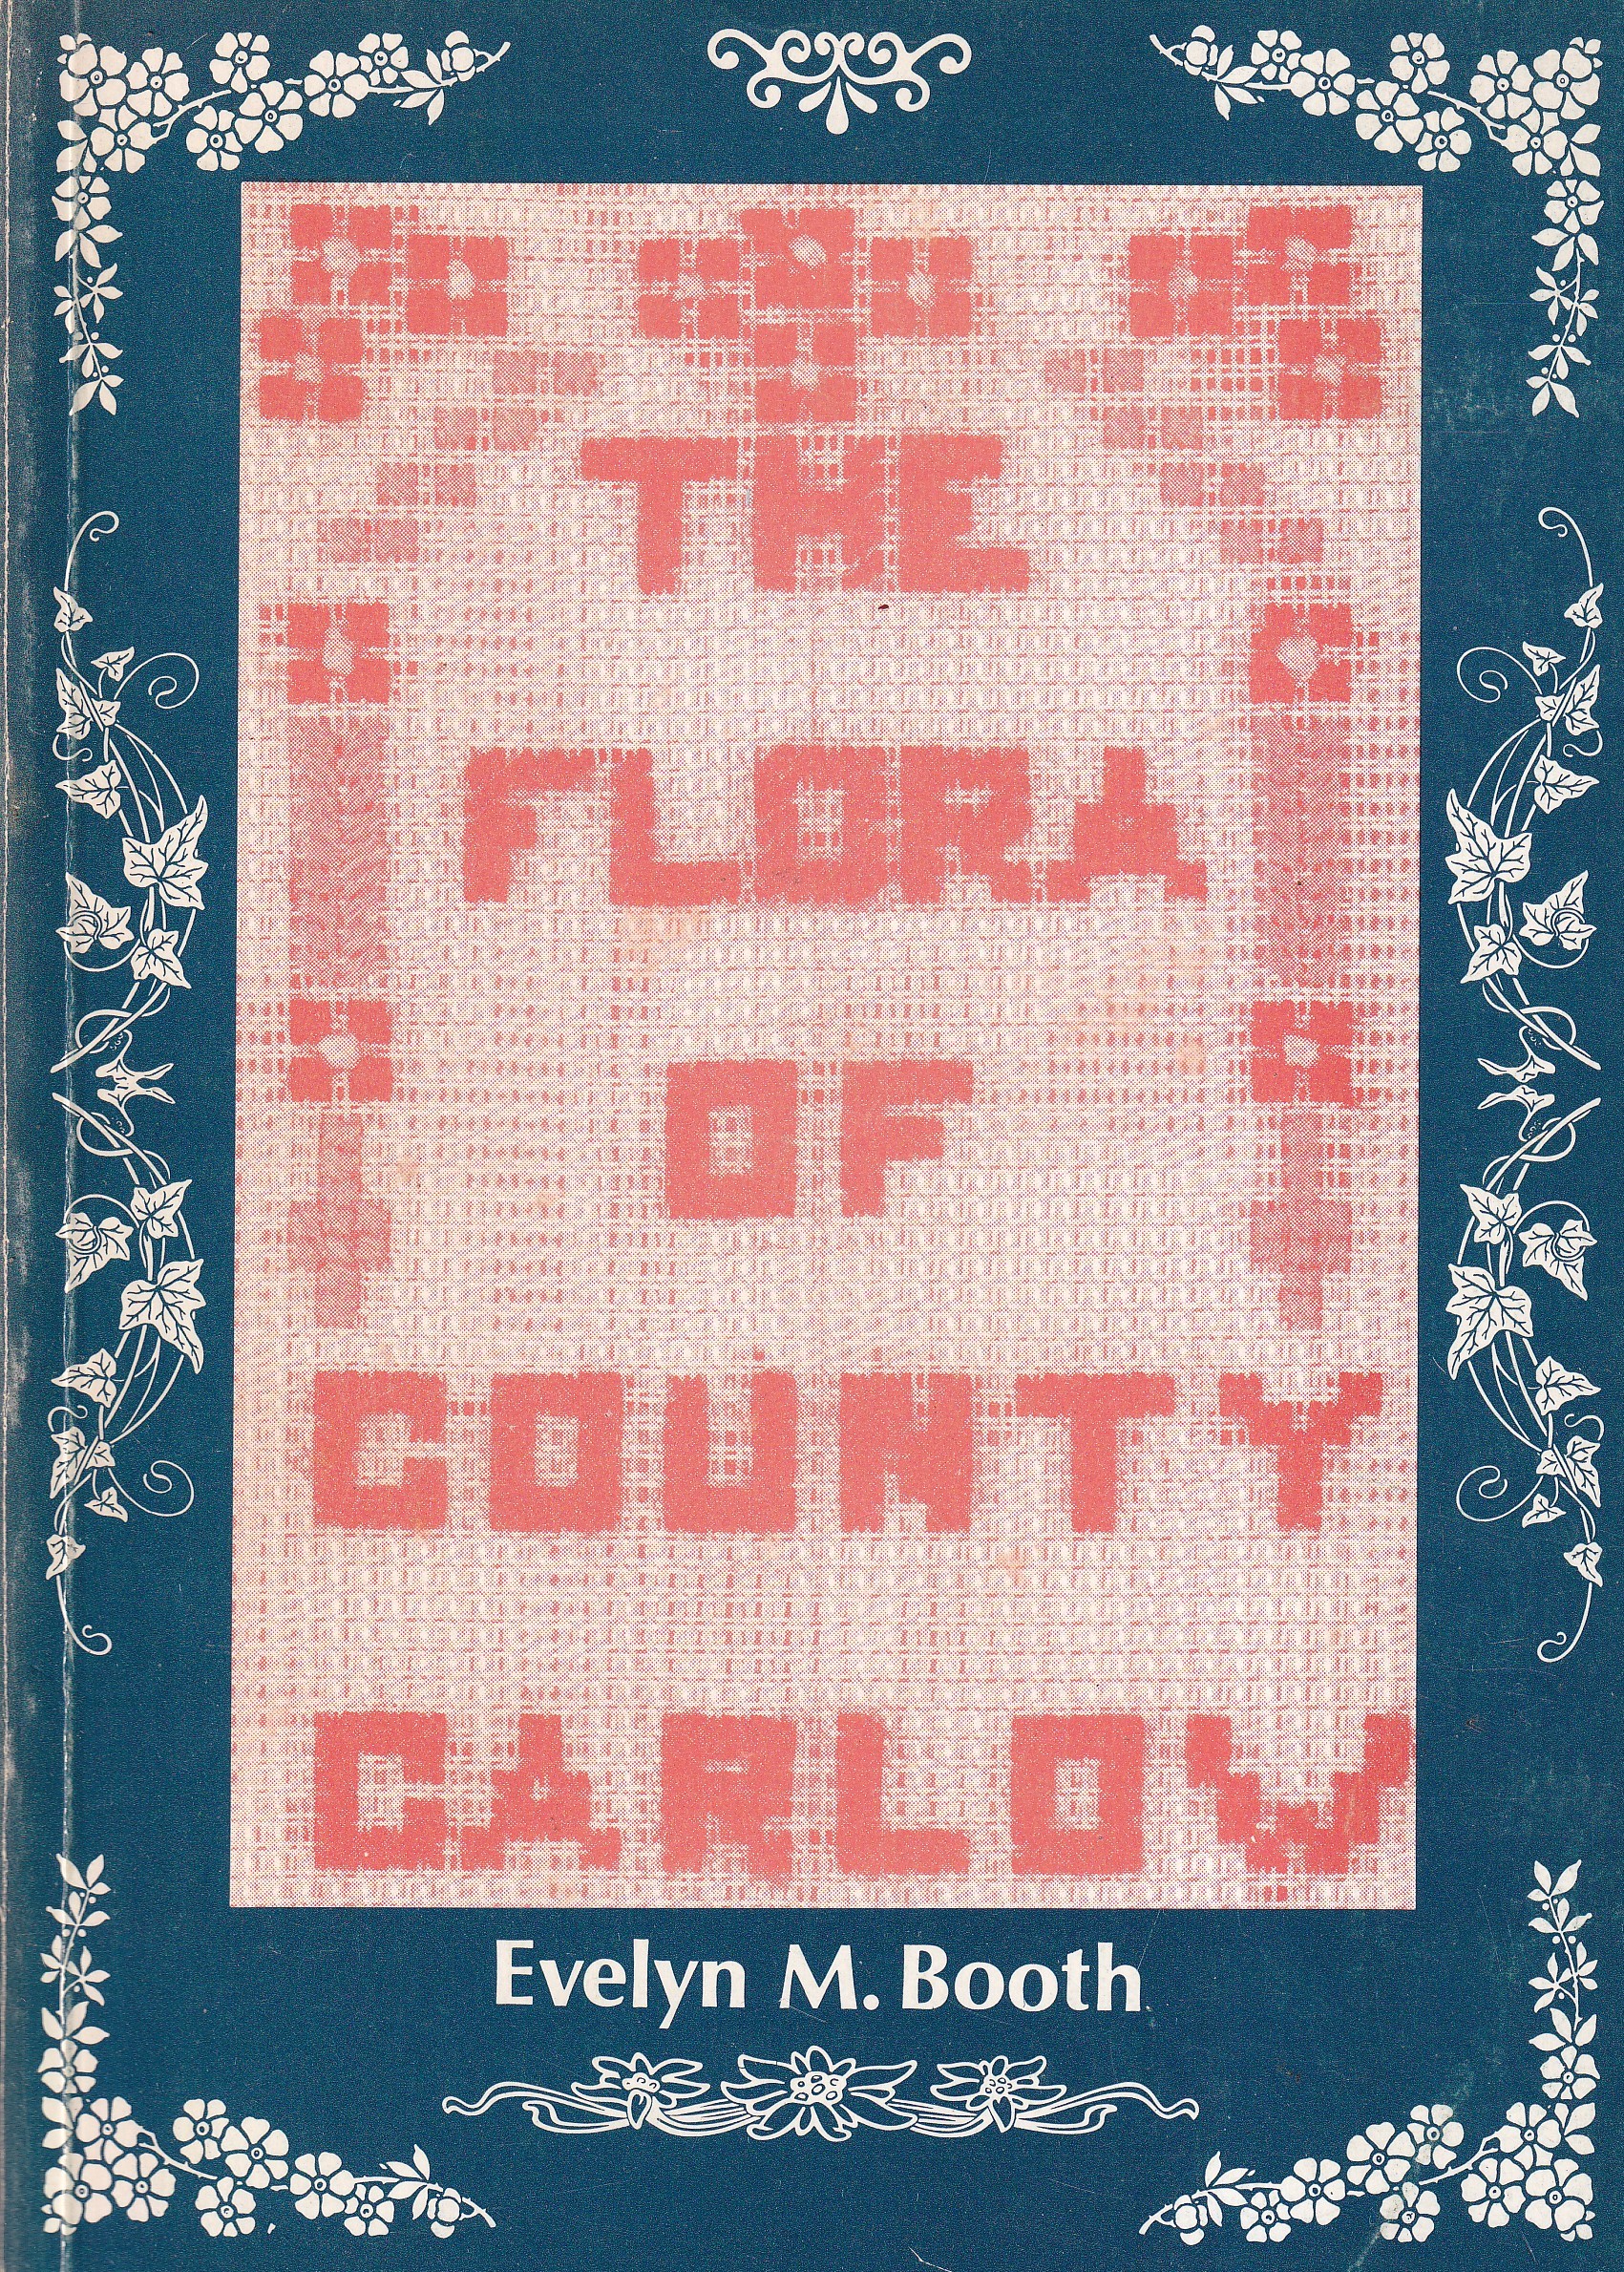 The Flora of County Carlow by Evelyn M. Booth